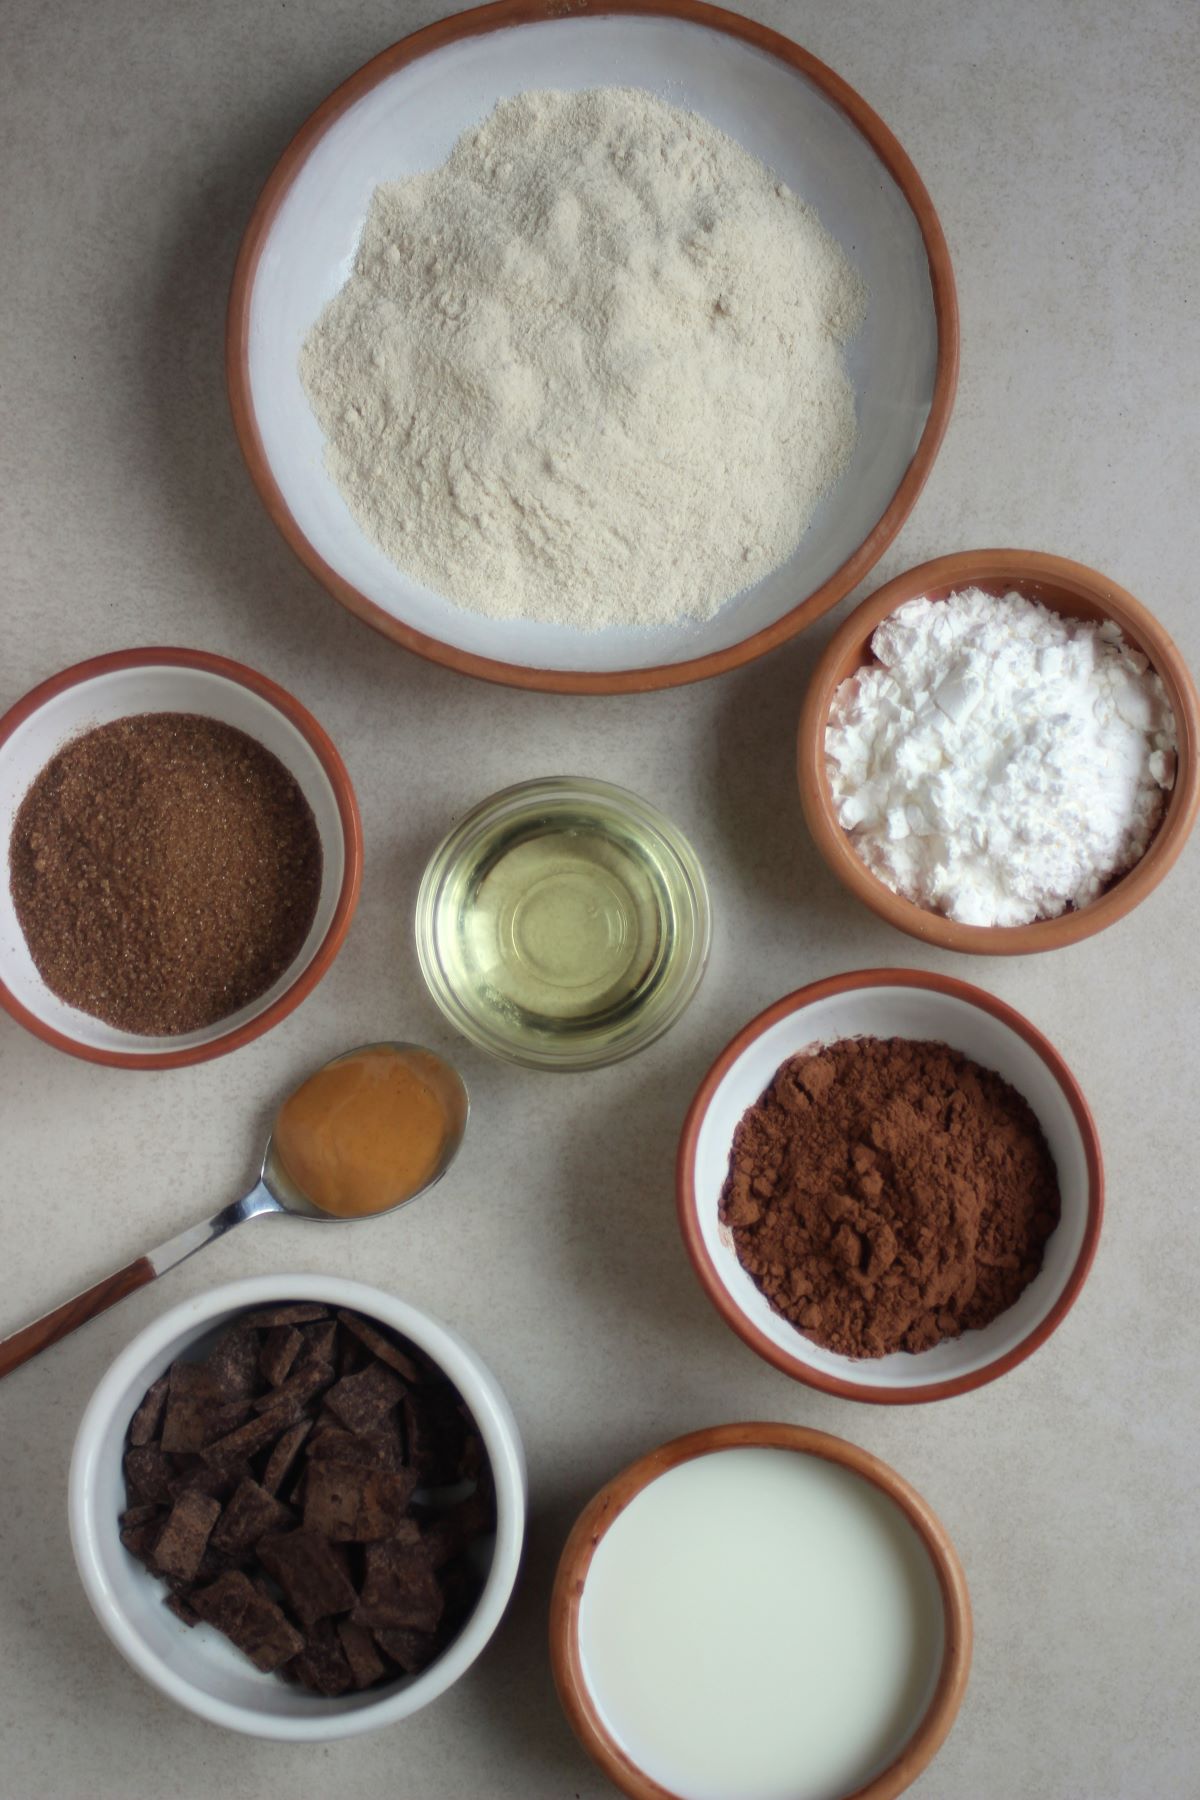 Vegan chocolate cookie ingredients on different plates seen from above.